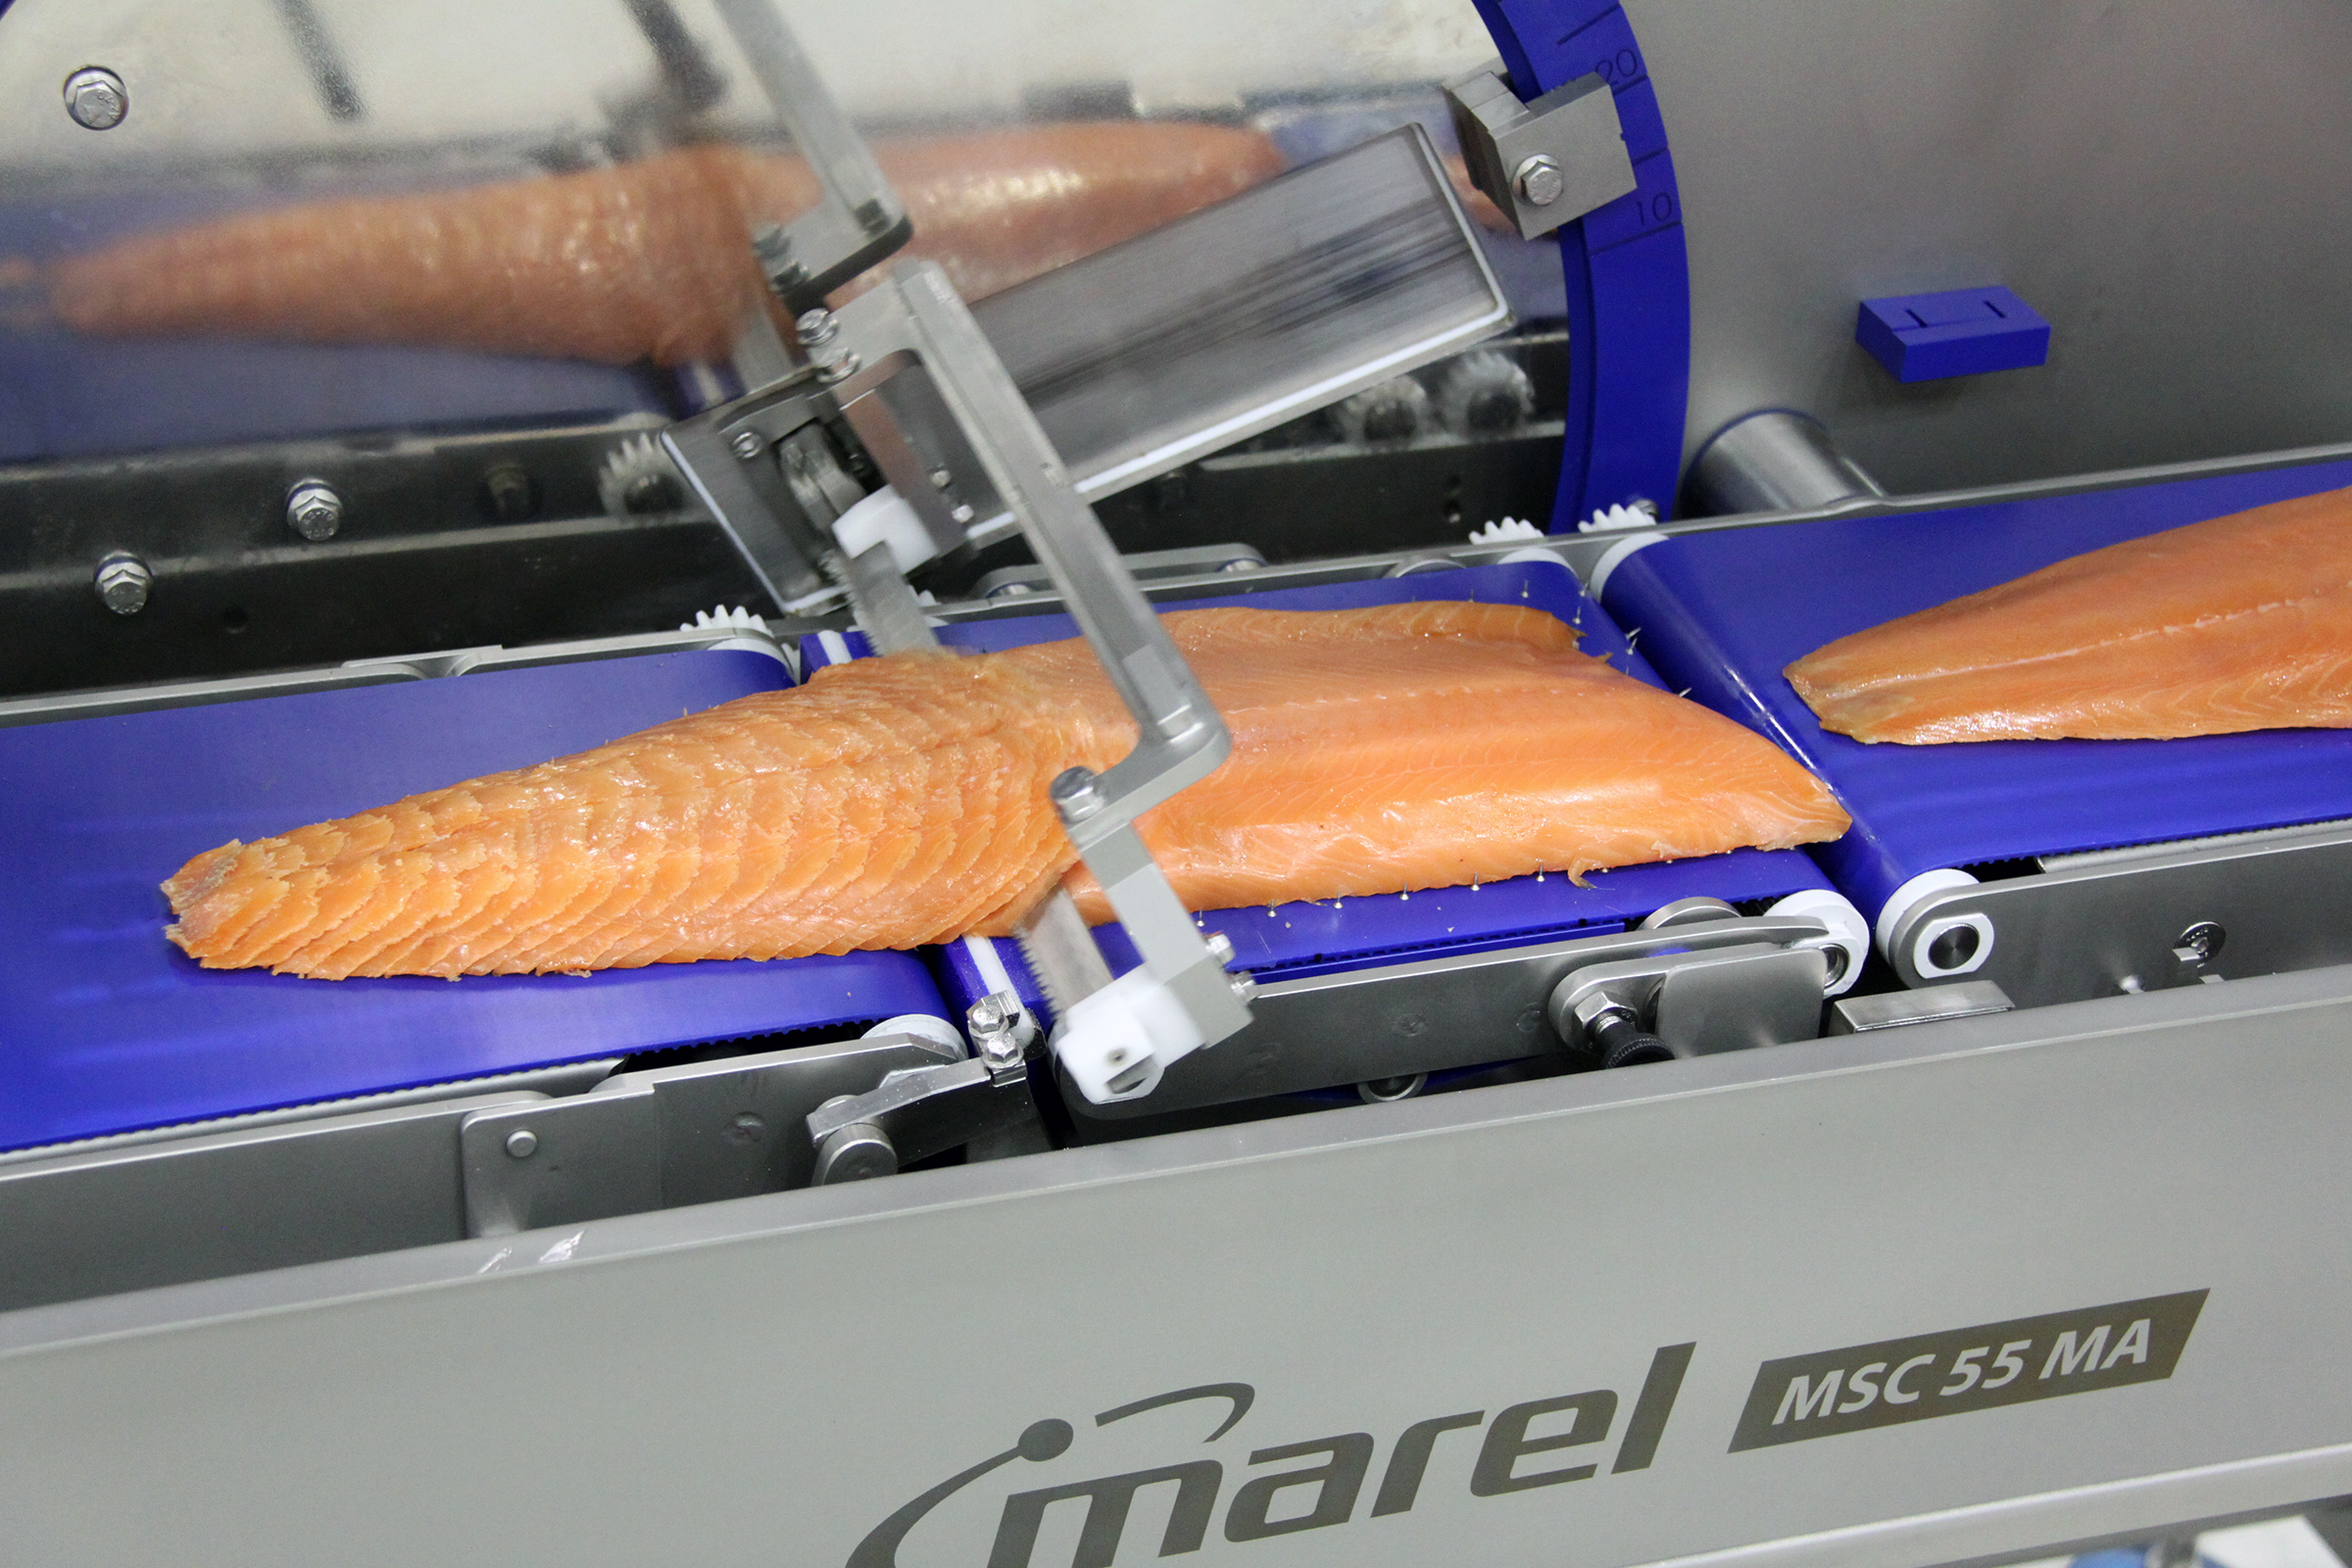 Introducing our new slicer MSC 55 MA